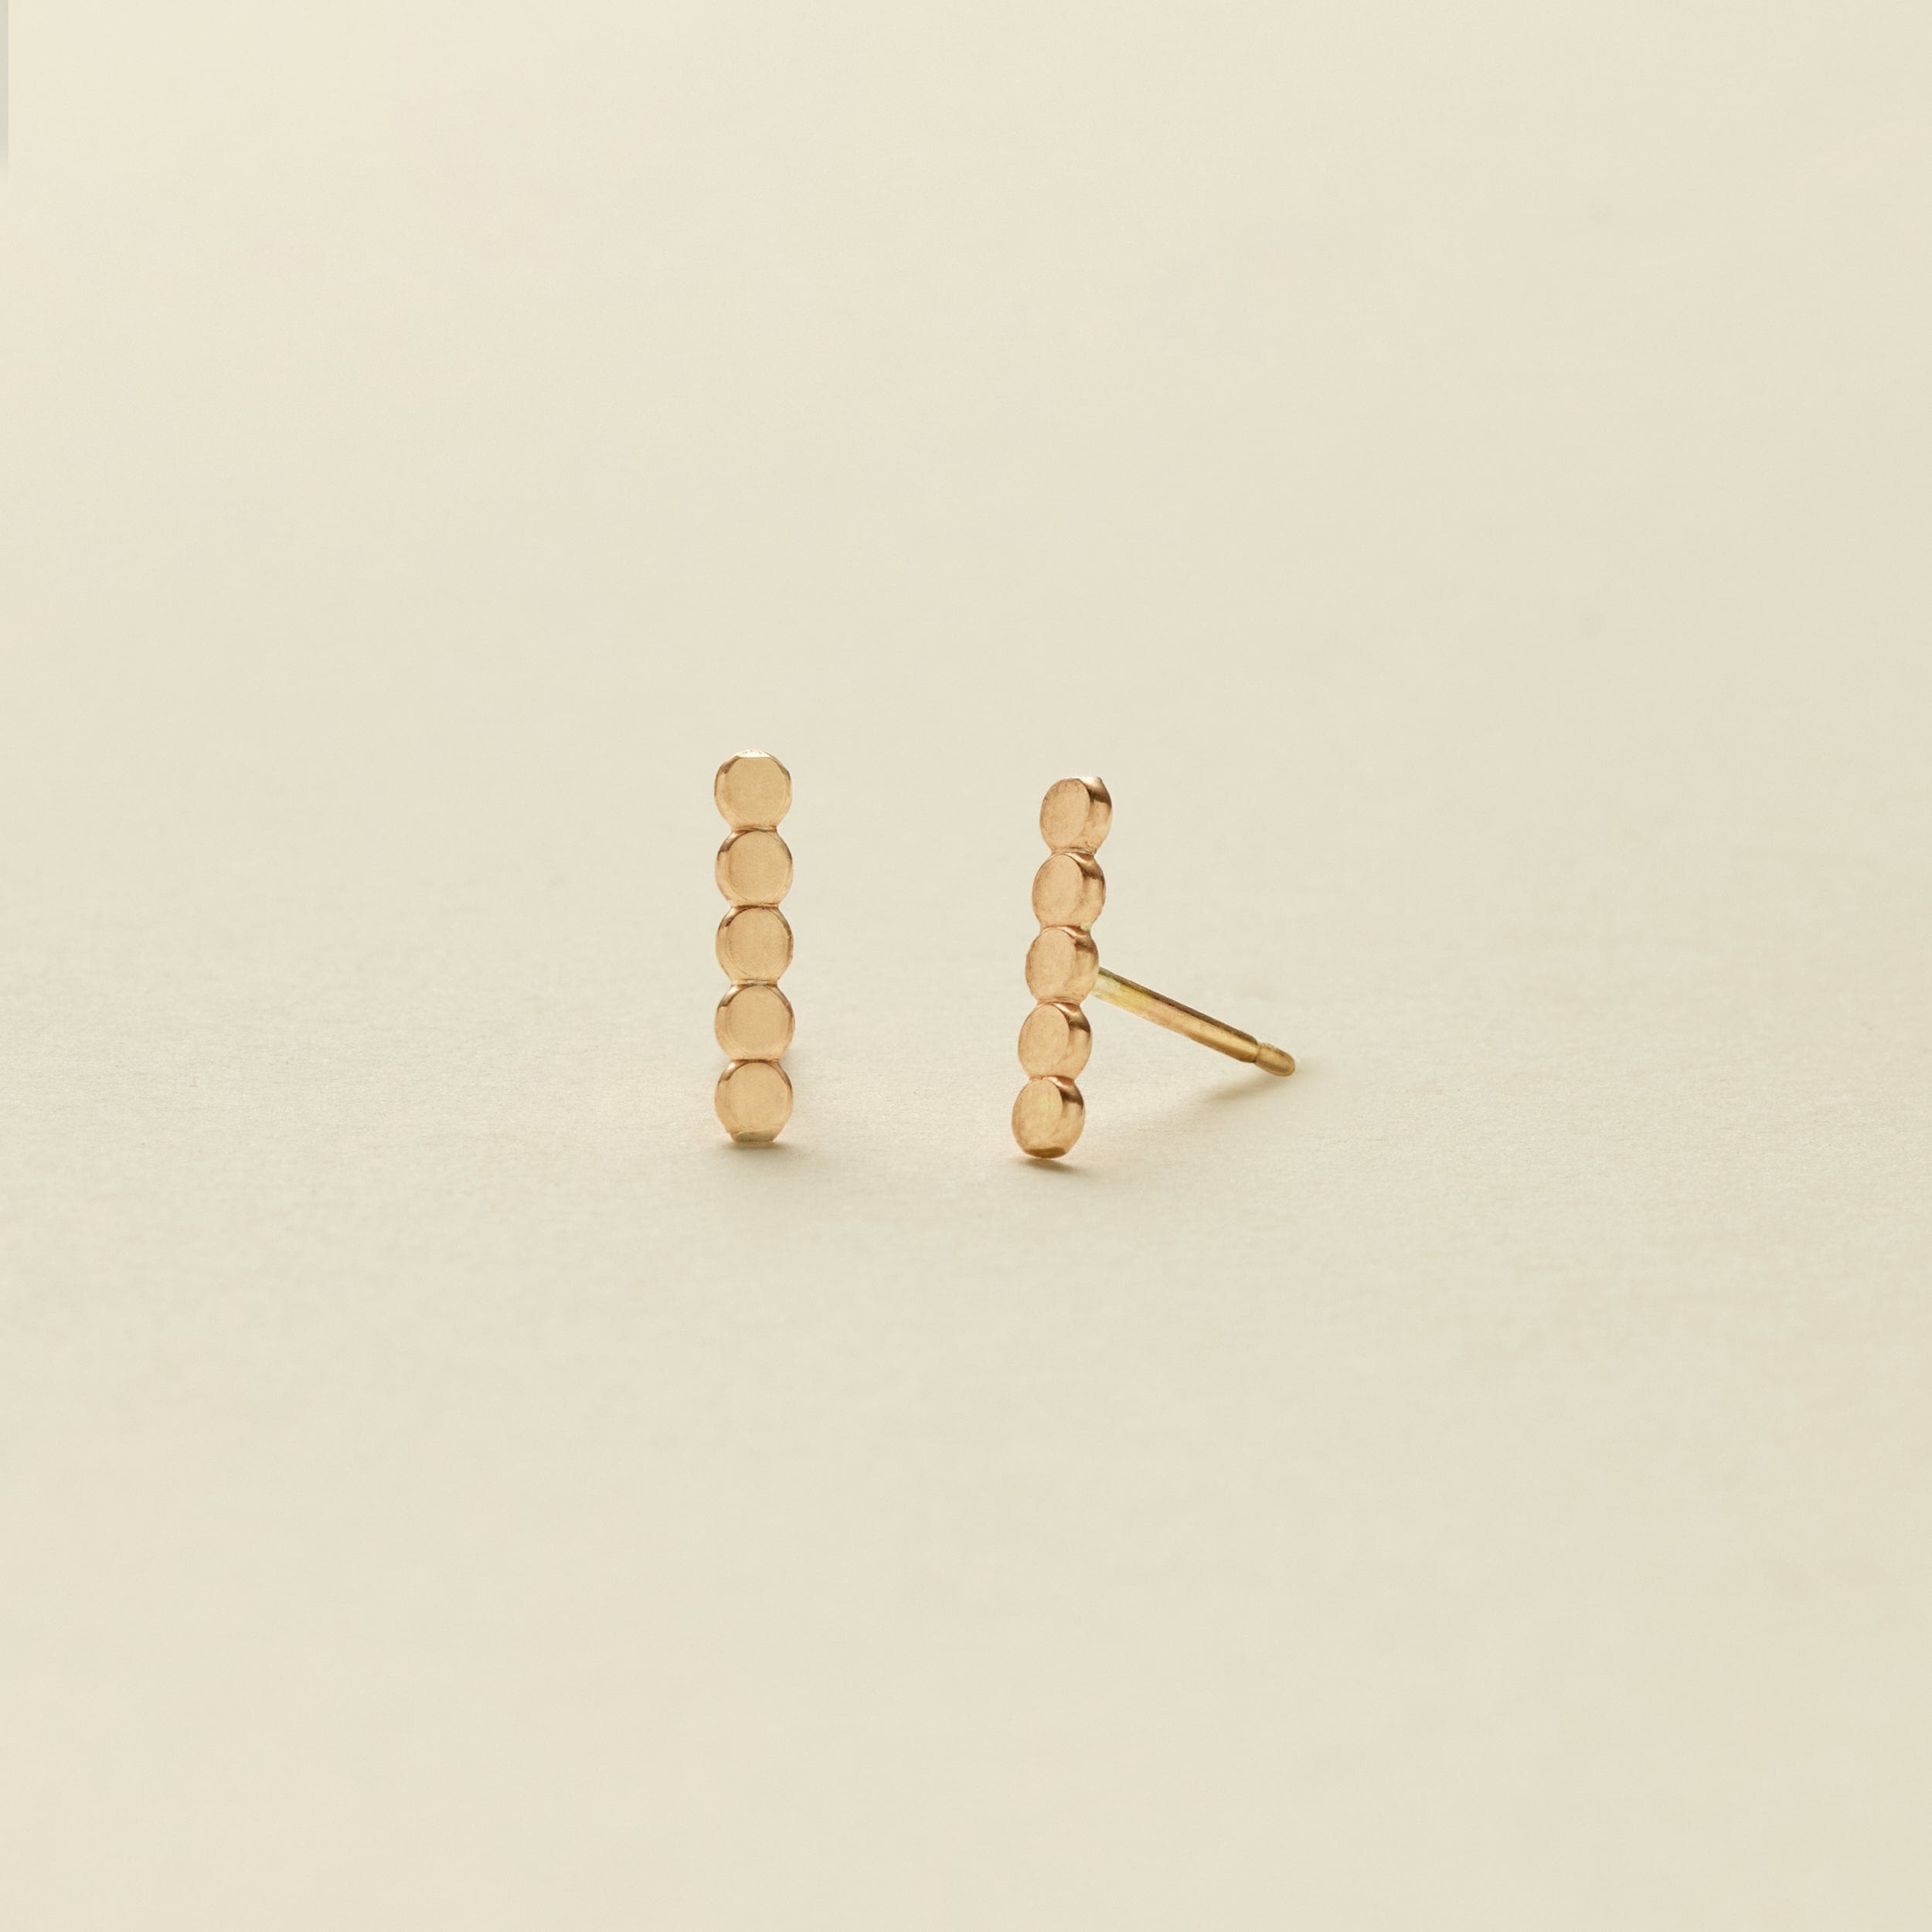 Tiny Bead Bar Stud Earrings in Sterling Silver Two Tiny Dots 